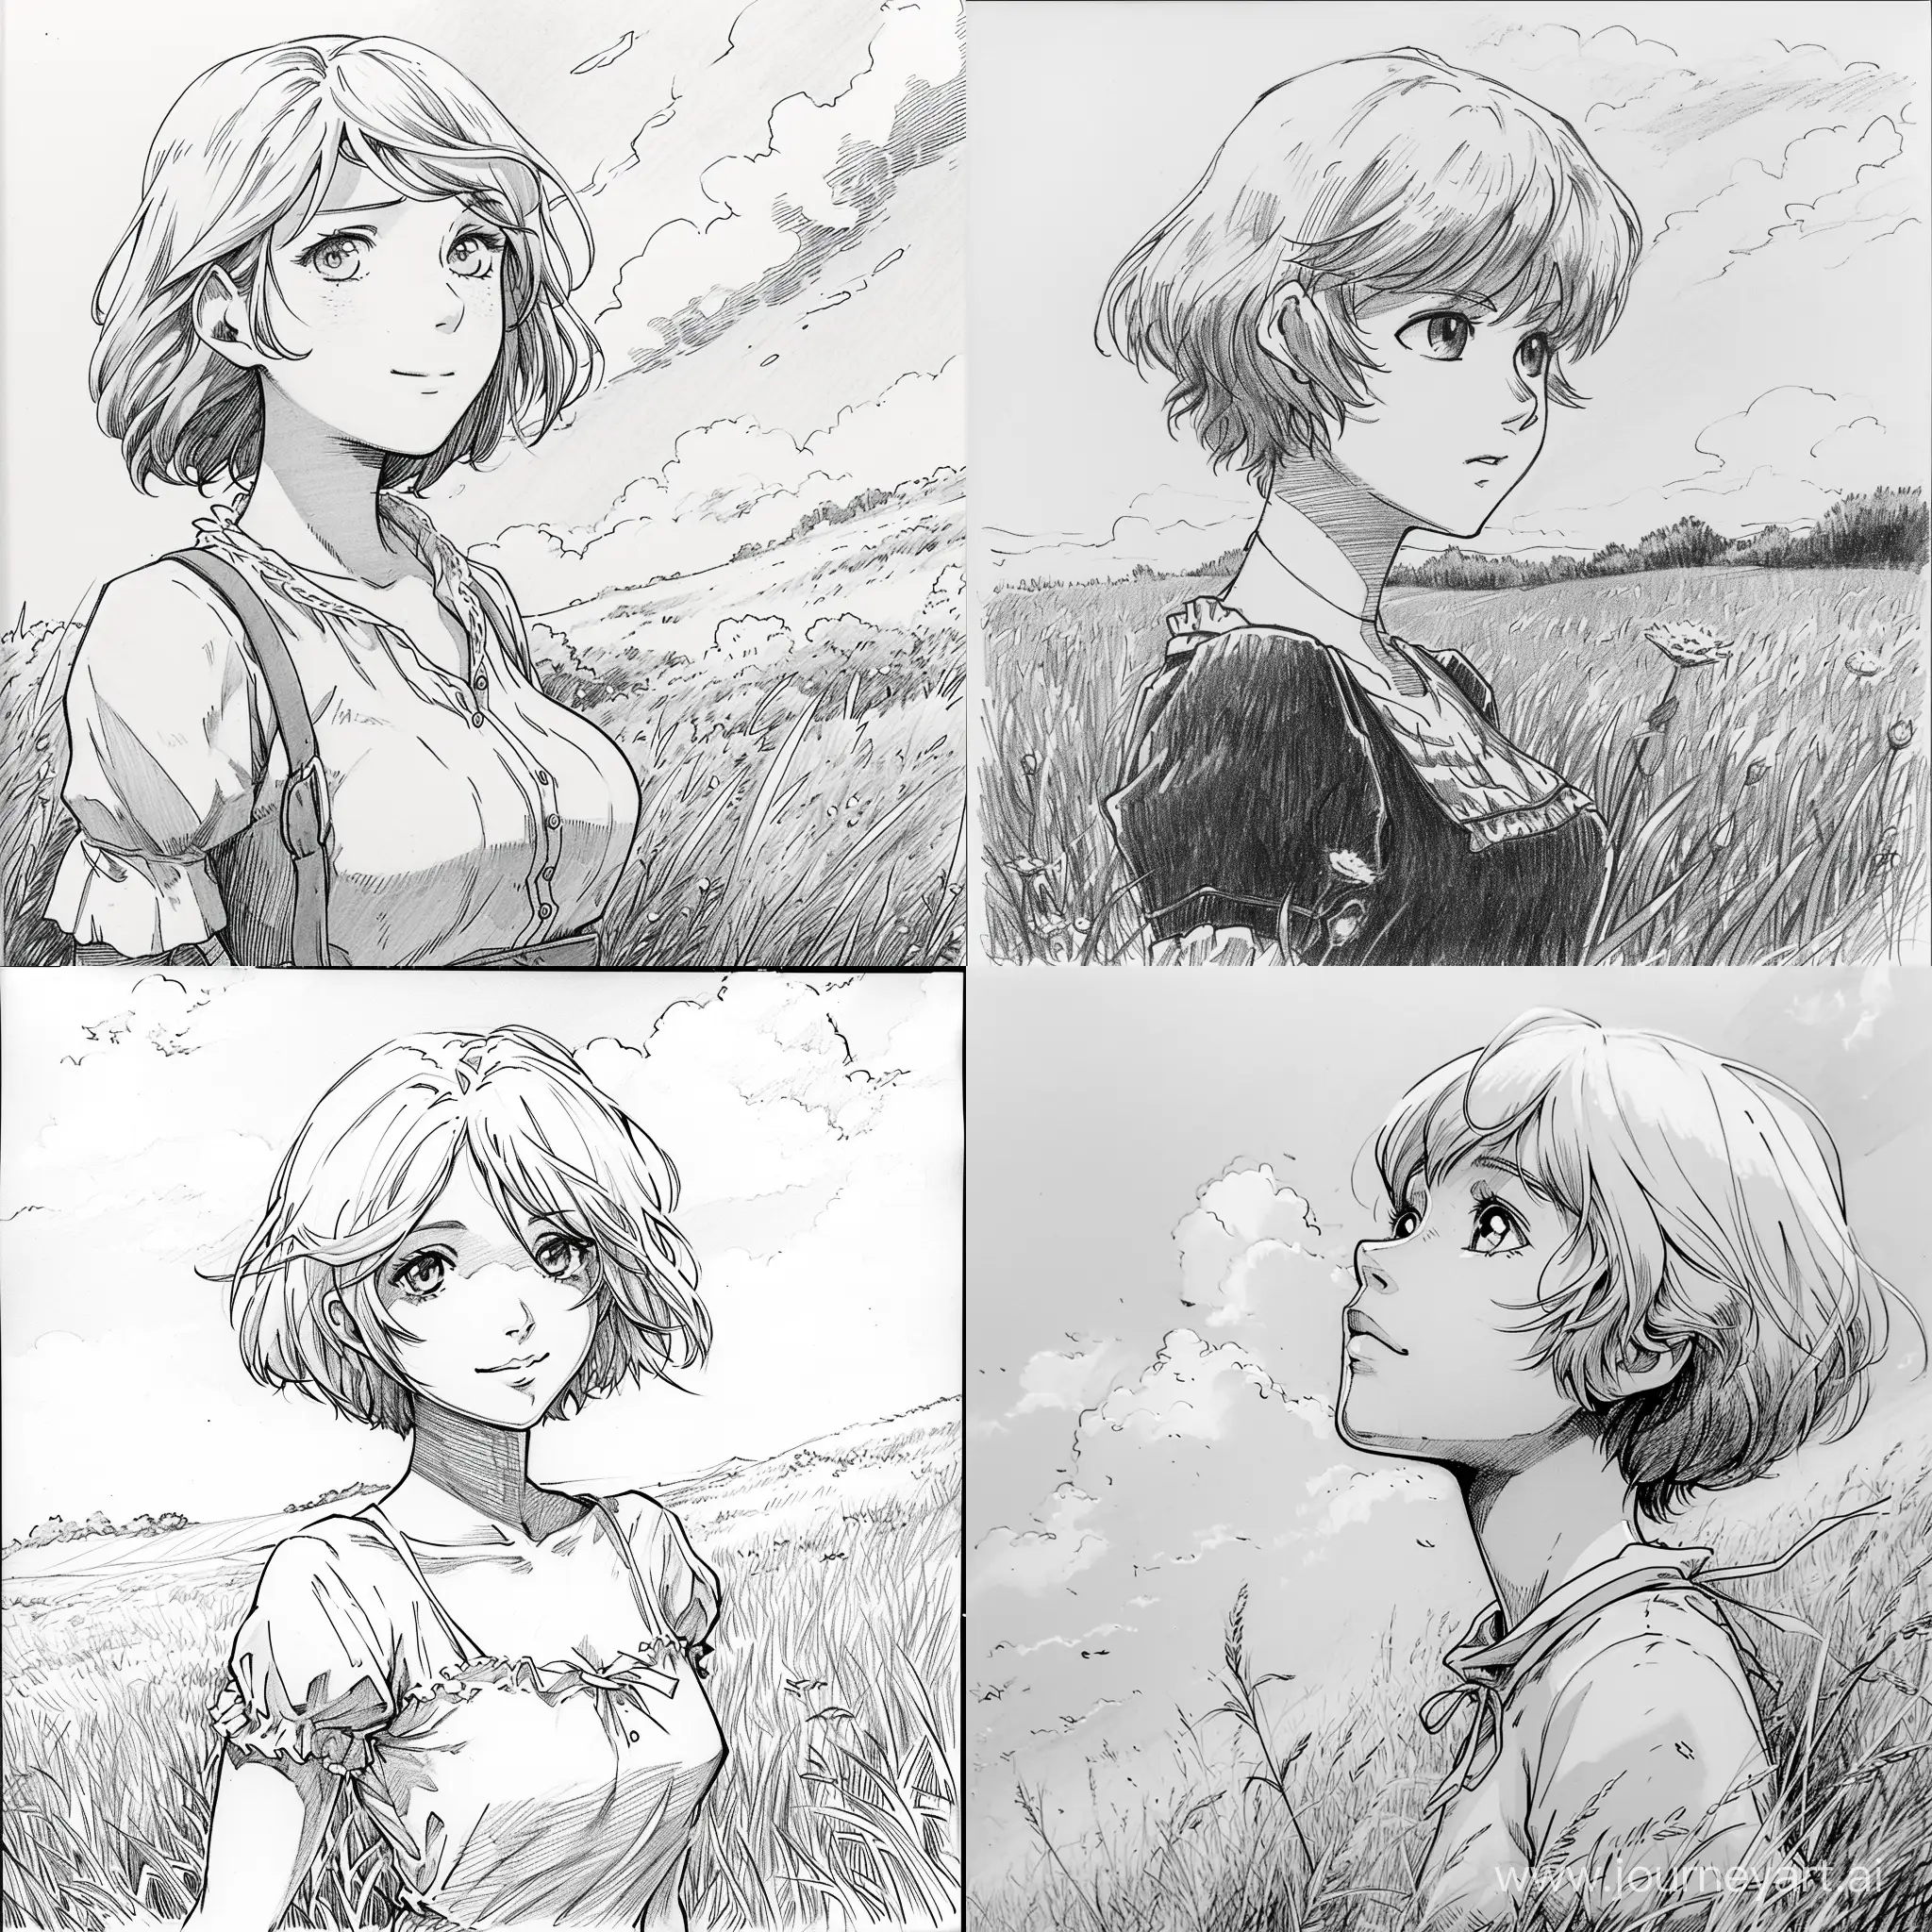 Young-Shepherdess-in-Monochrome-Pencil-Drawing-Vintage-Anime-Style